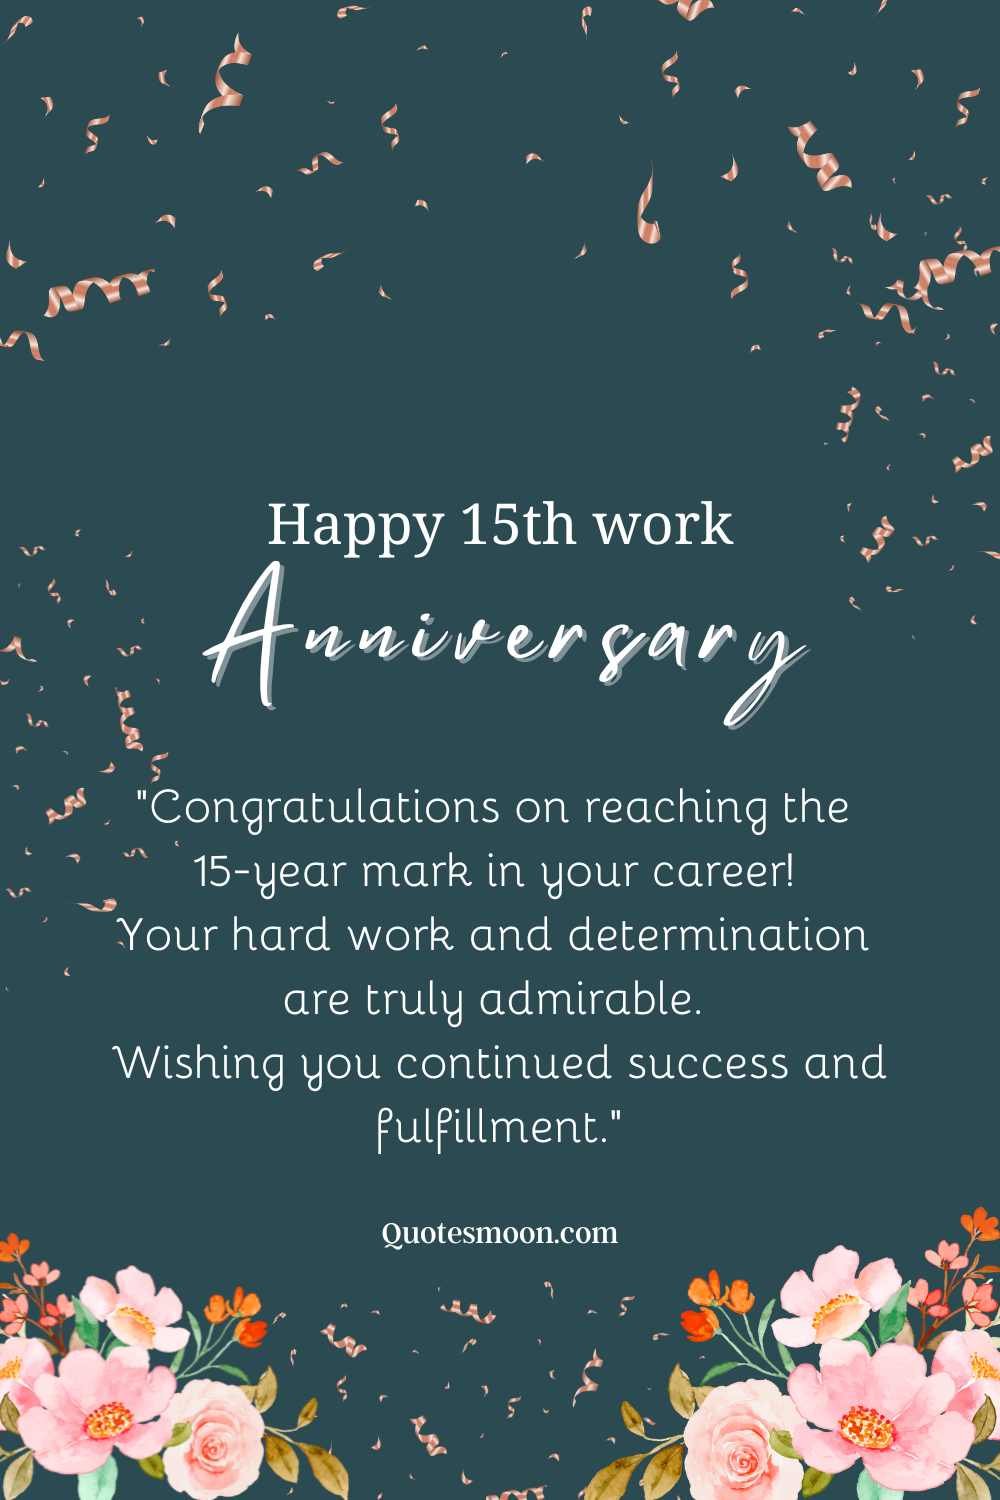 wishes for 15th year work anniversary pics